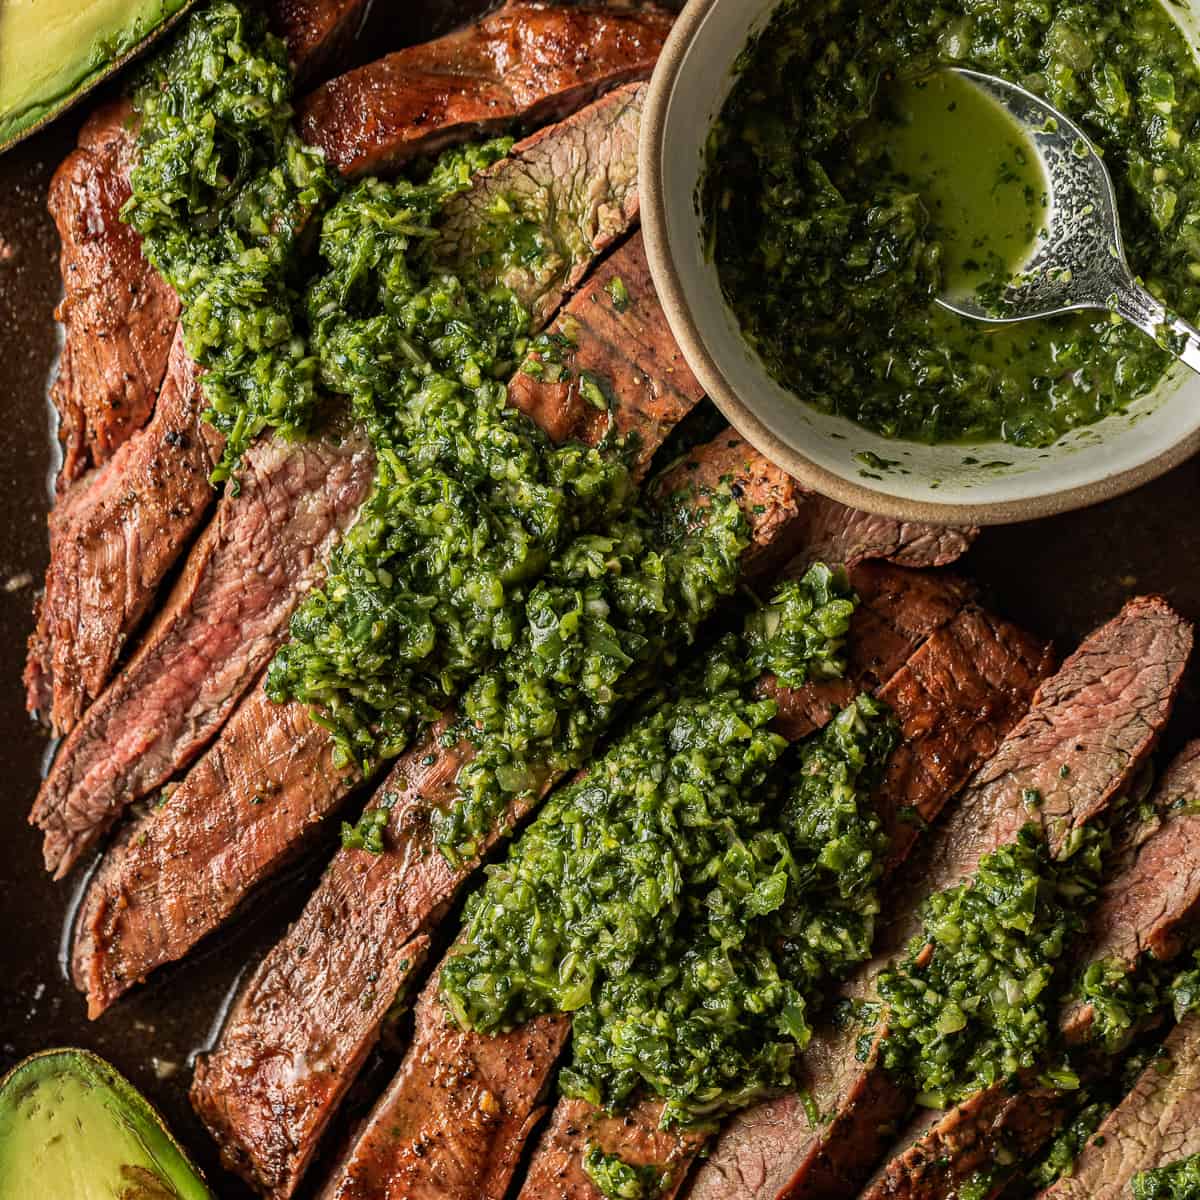 Traegar smoked steak that's sliced and dressed with green chimichurri sauce.